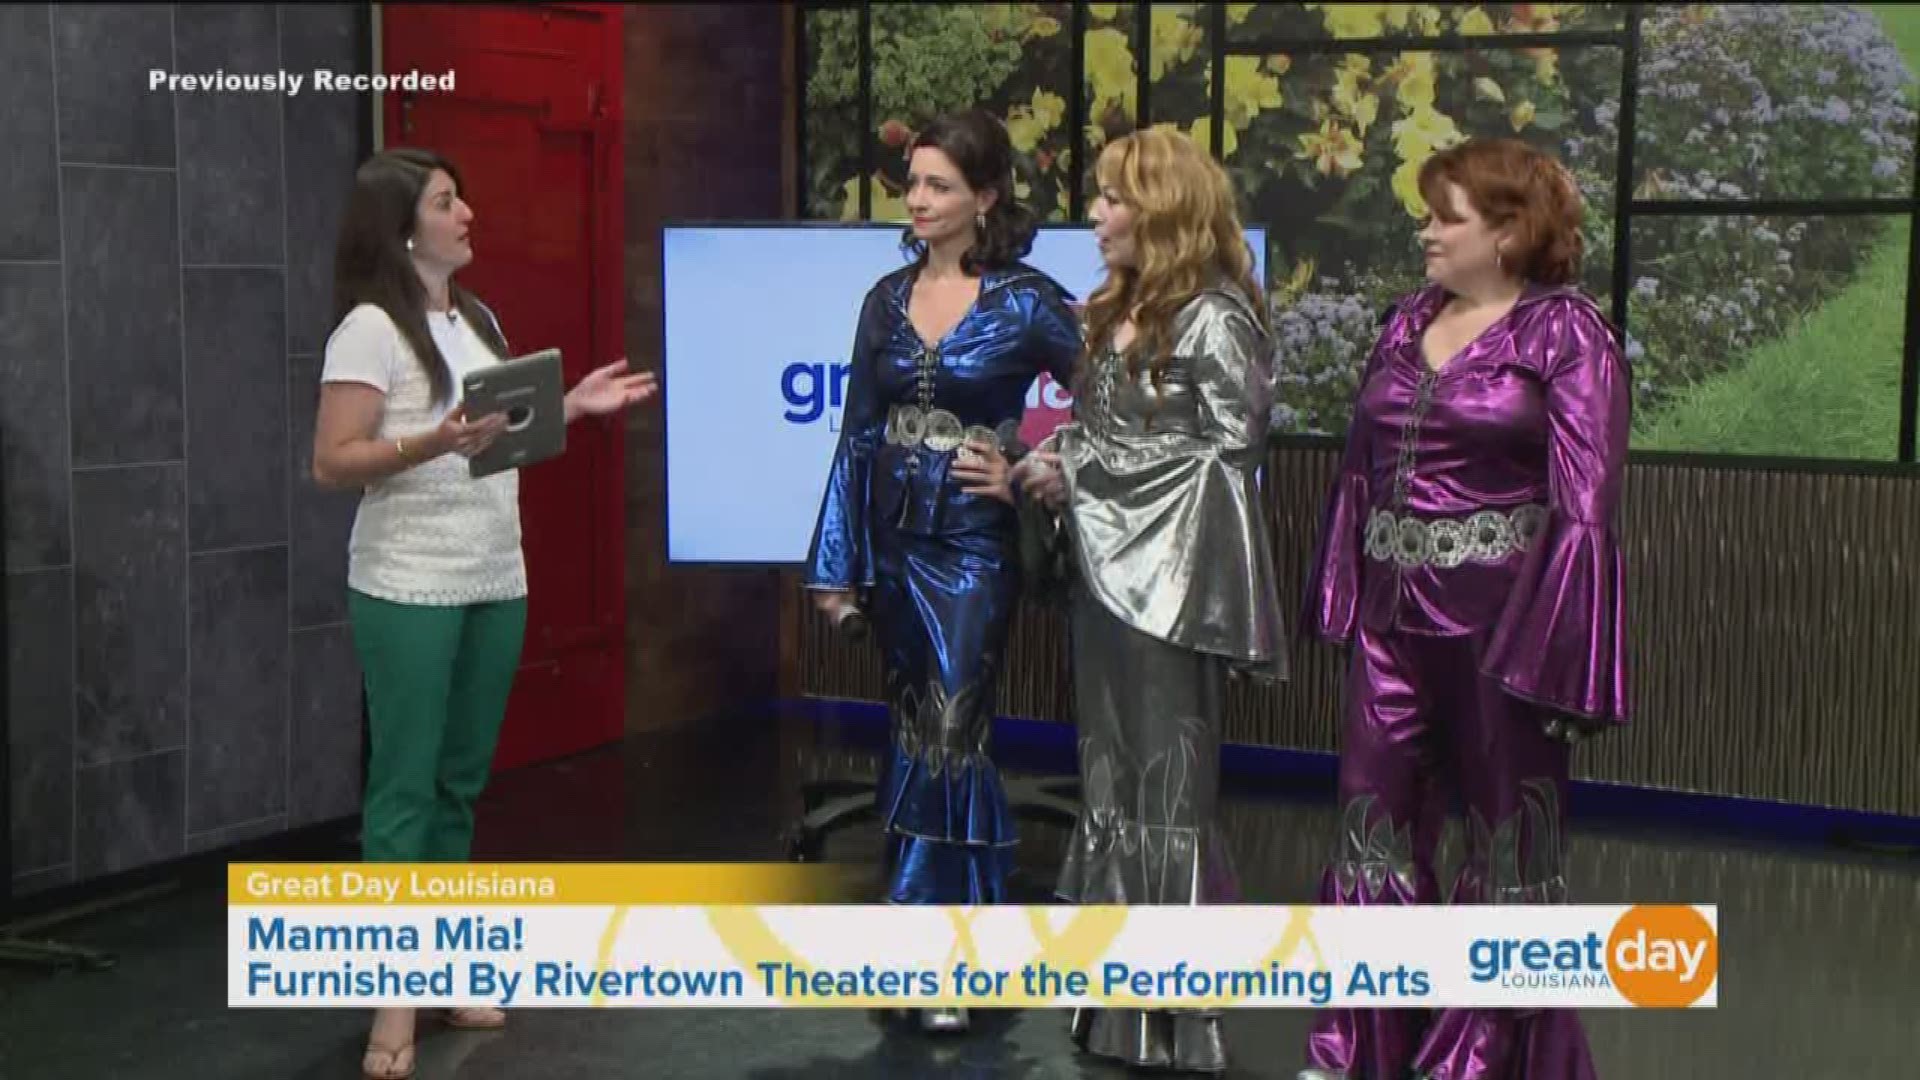 Mamma Mia!, the famous musical featuring the music from ABBA is coming to the Rivertown Theaters for Performing Arts. Here to tell us more is Ashley Lemmler who plays lead character Donna Sheridan.